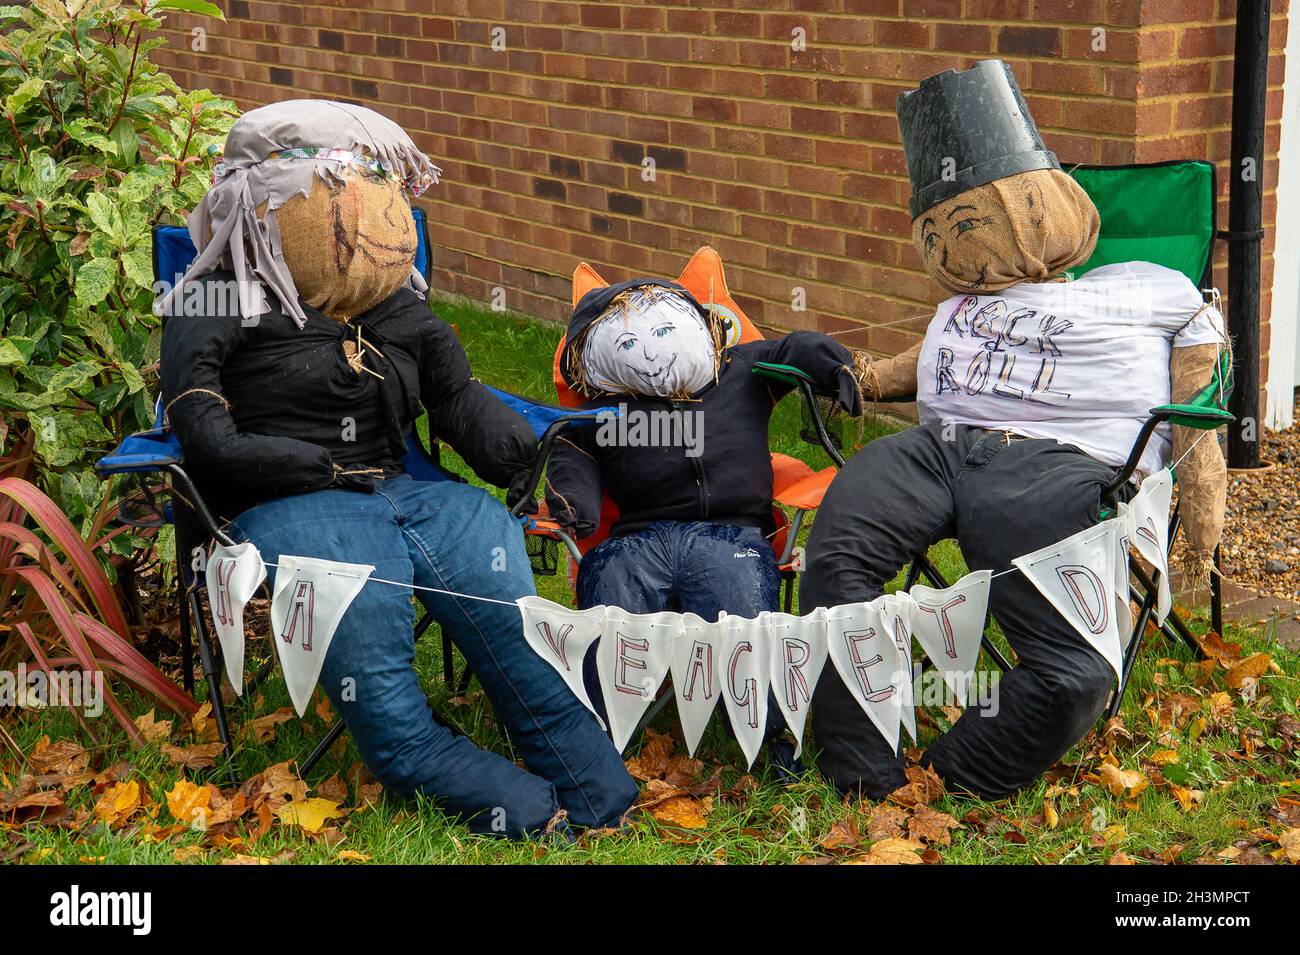 Marlow Bottom, Buckinghamshire, UK. 29th October, 2021. There was plenty to see in Marlow Bottom today as the whacky entries into the Marlow Bottom Annual Scarecrow Festival organised by Friends of Burford were causing plenty of smiles and laughter. Funds raised from the event will go to local Buford School. Credit: Maureen McLean/Alamy Live News Stock Photo